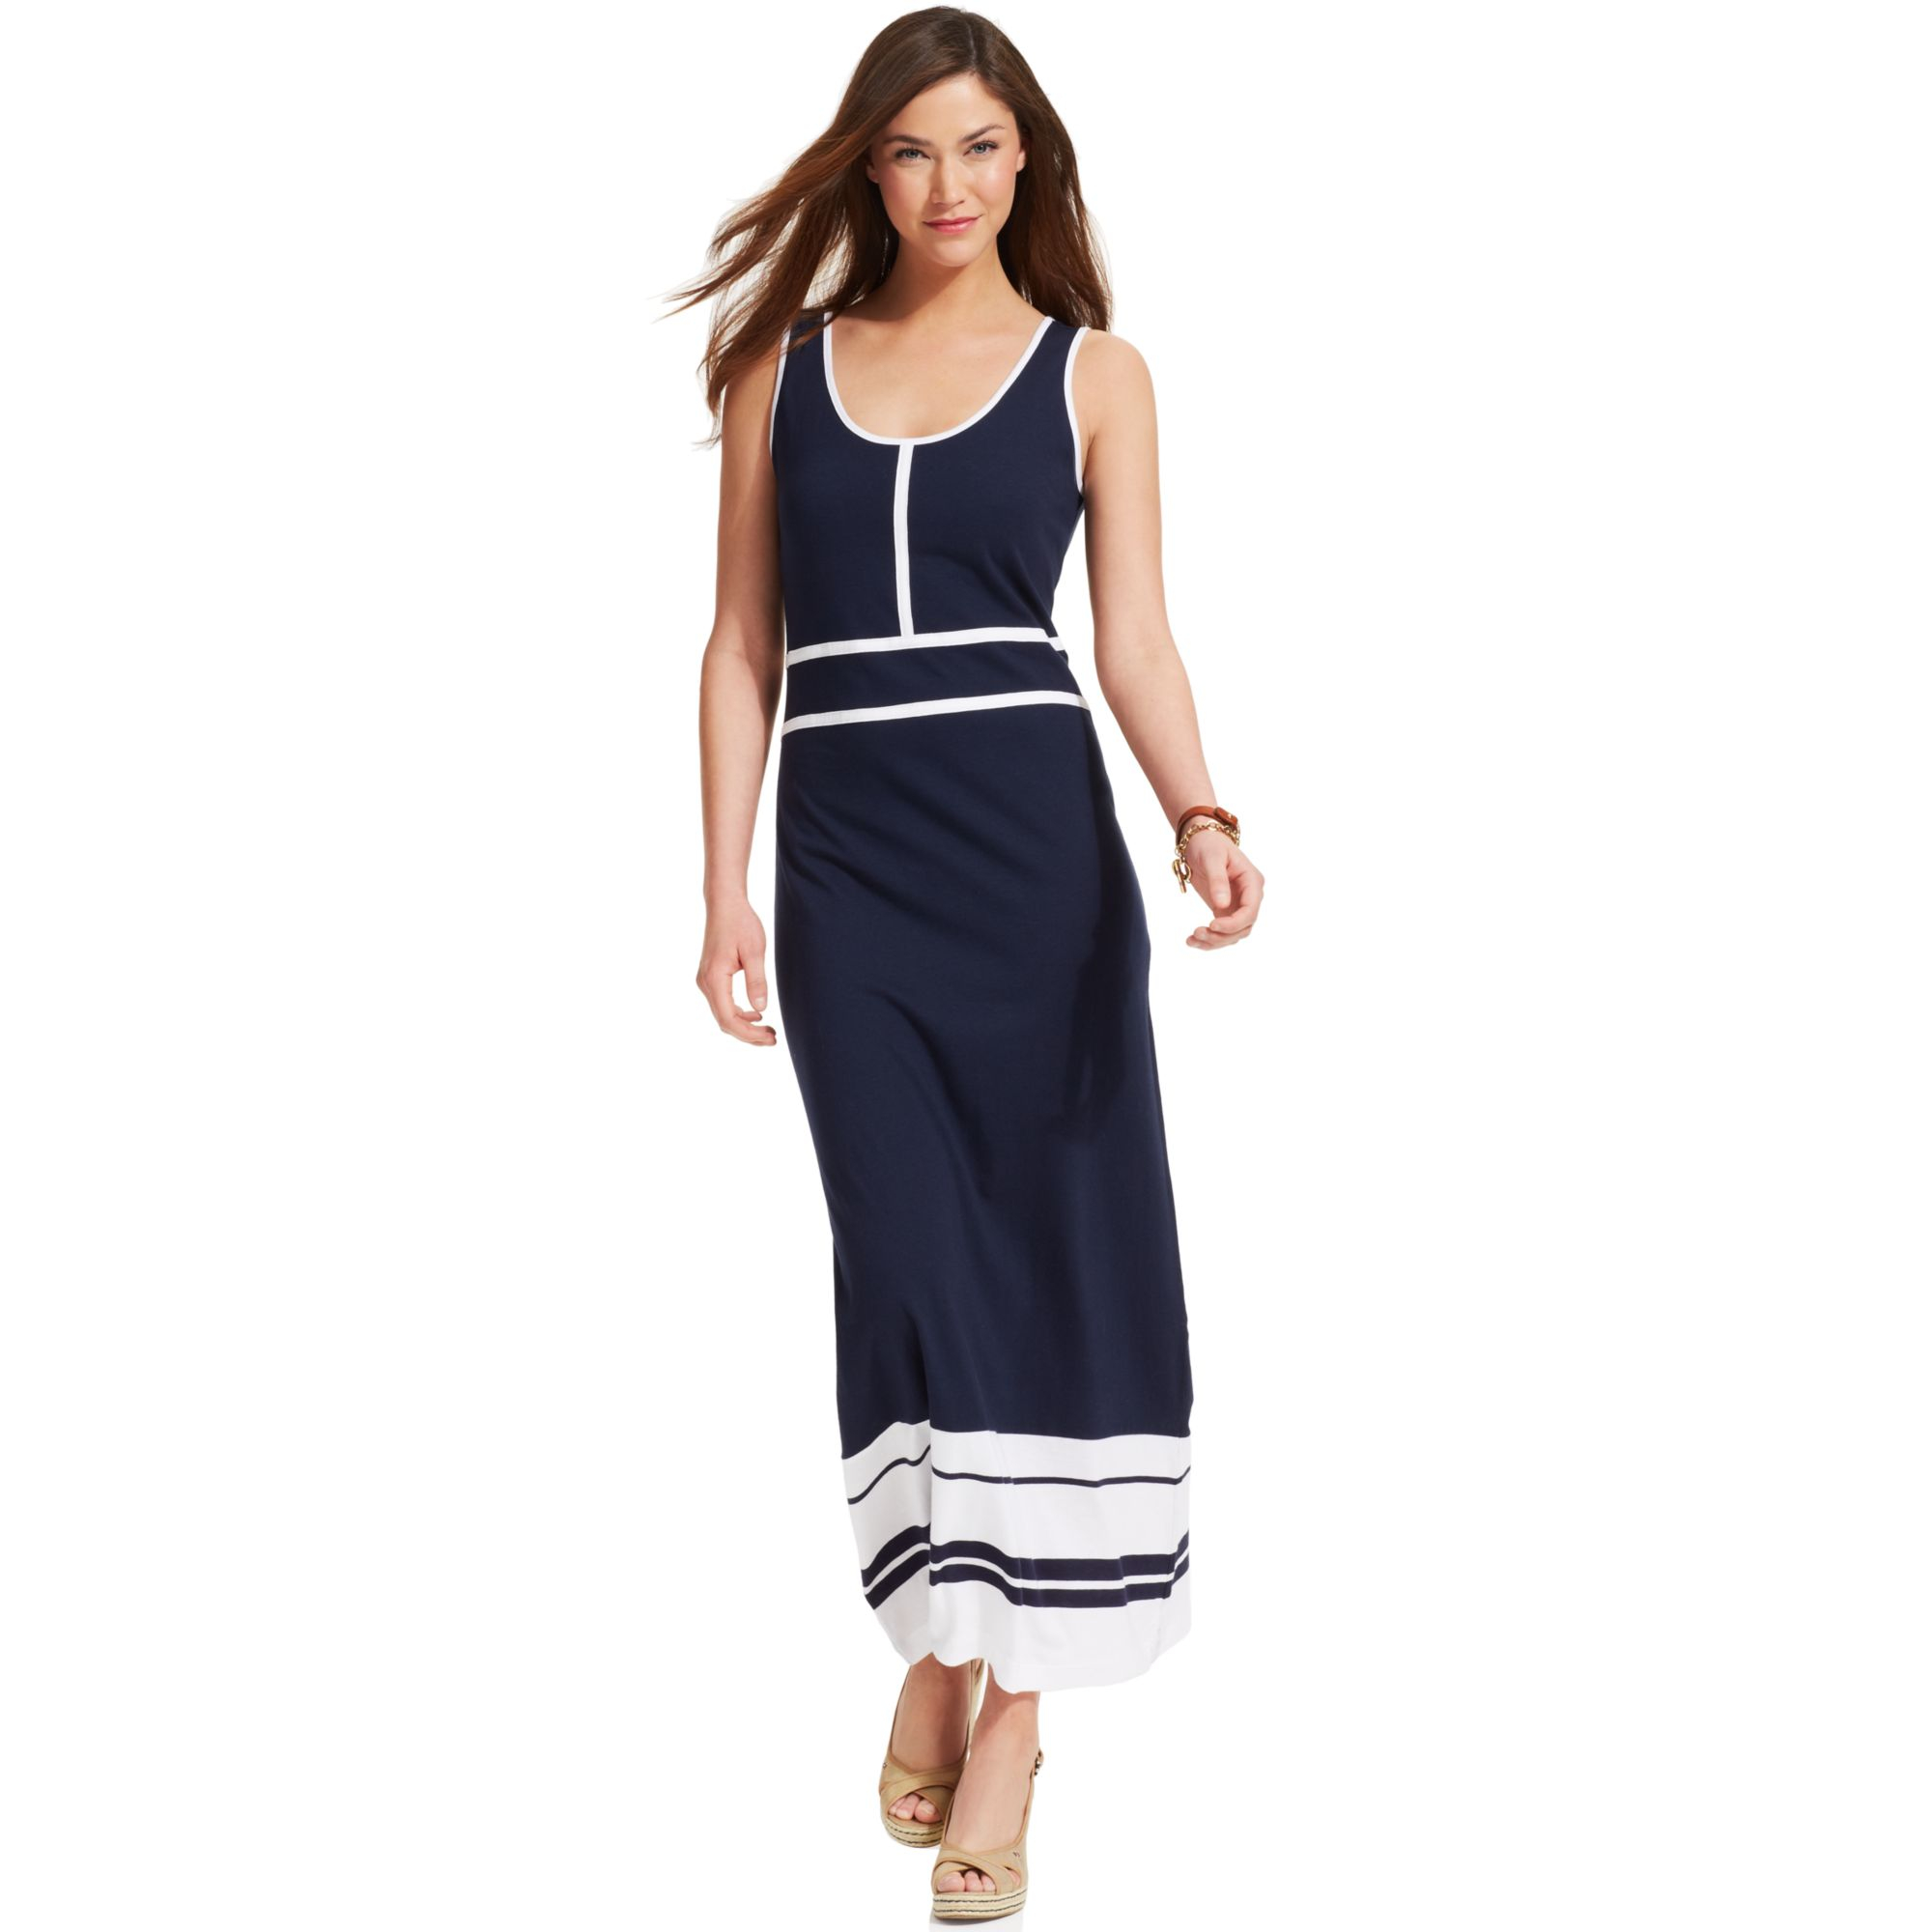 Tommy hilfiger Sleeveless Contrasttrim Colorblocked Maxi Dress in Blue